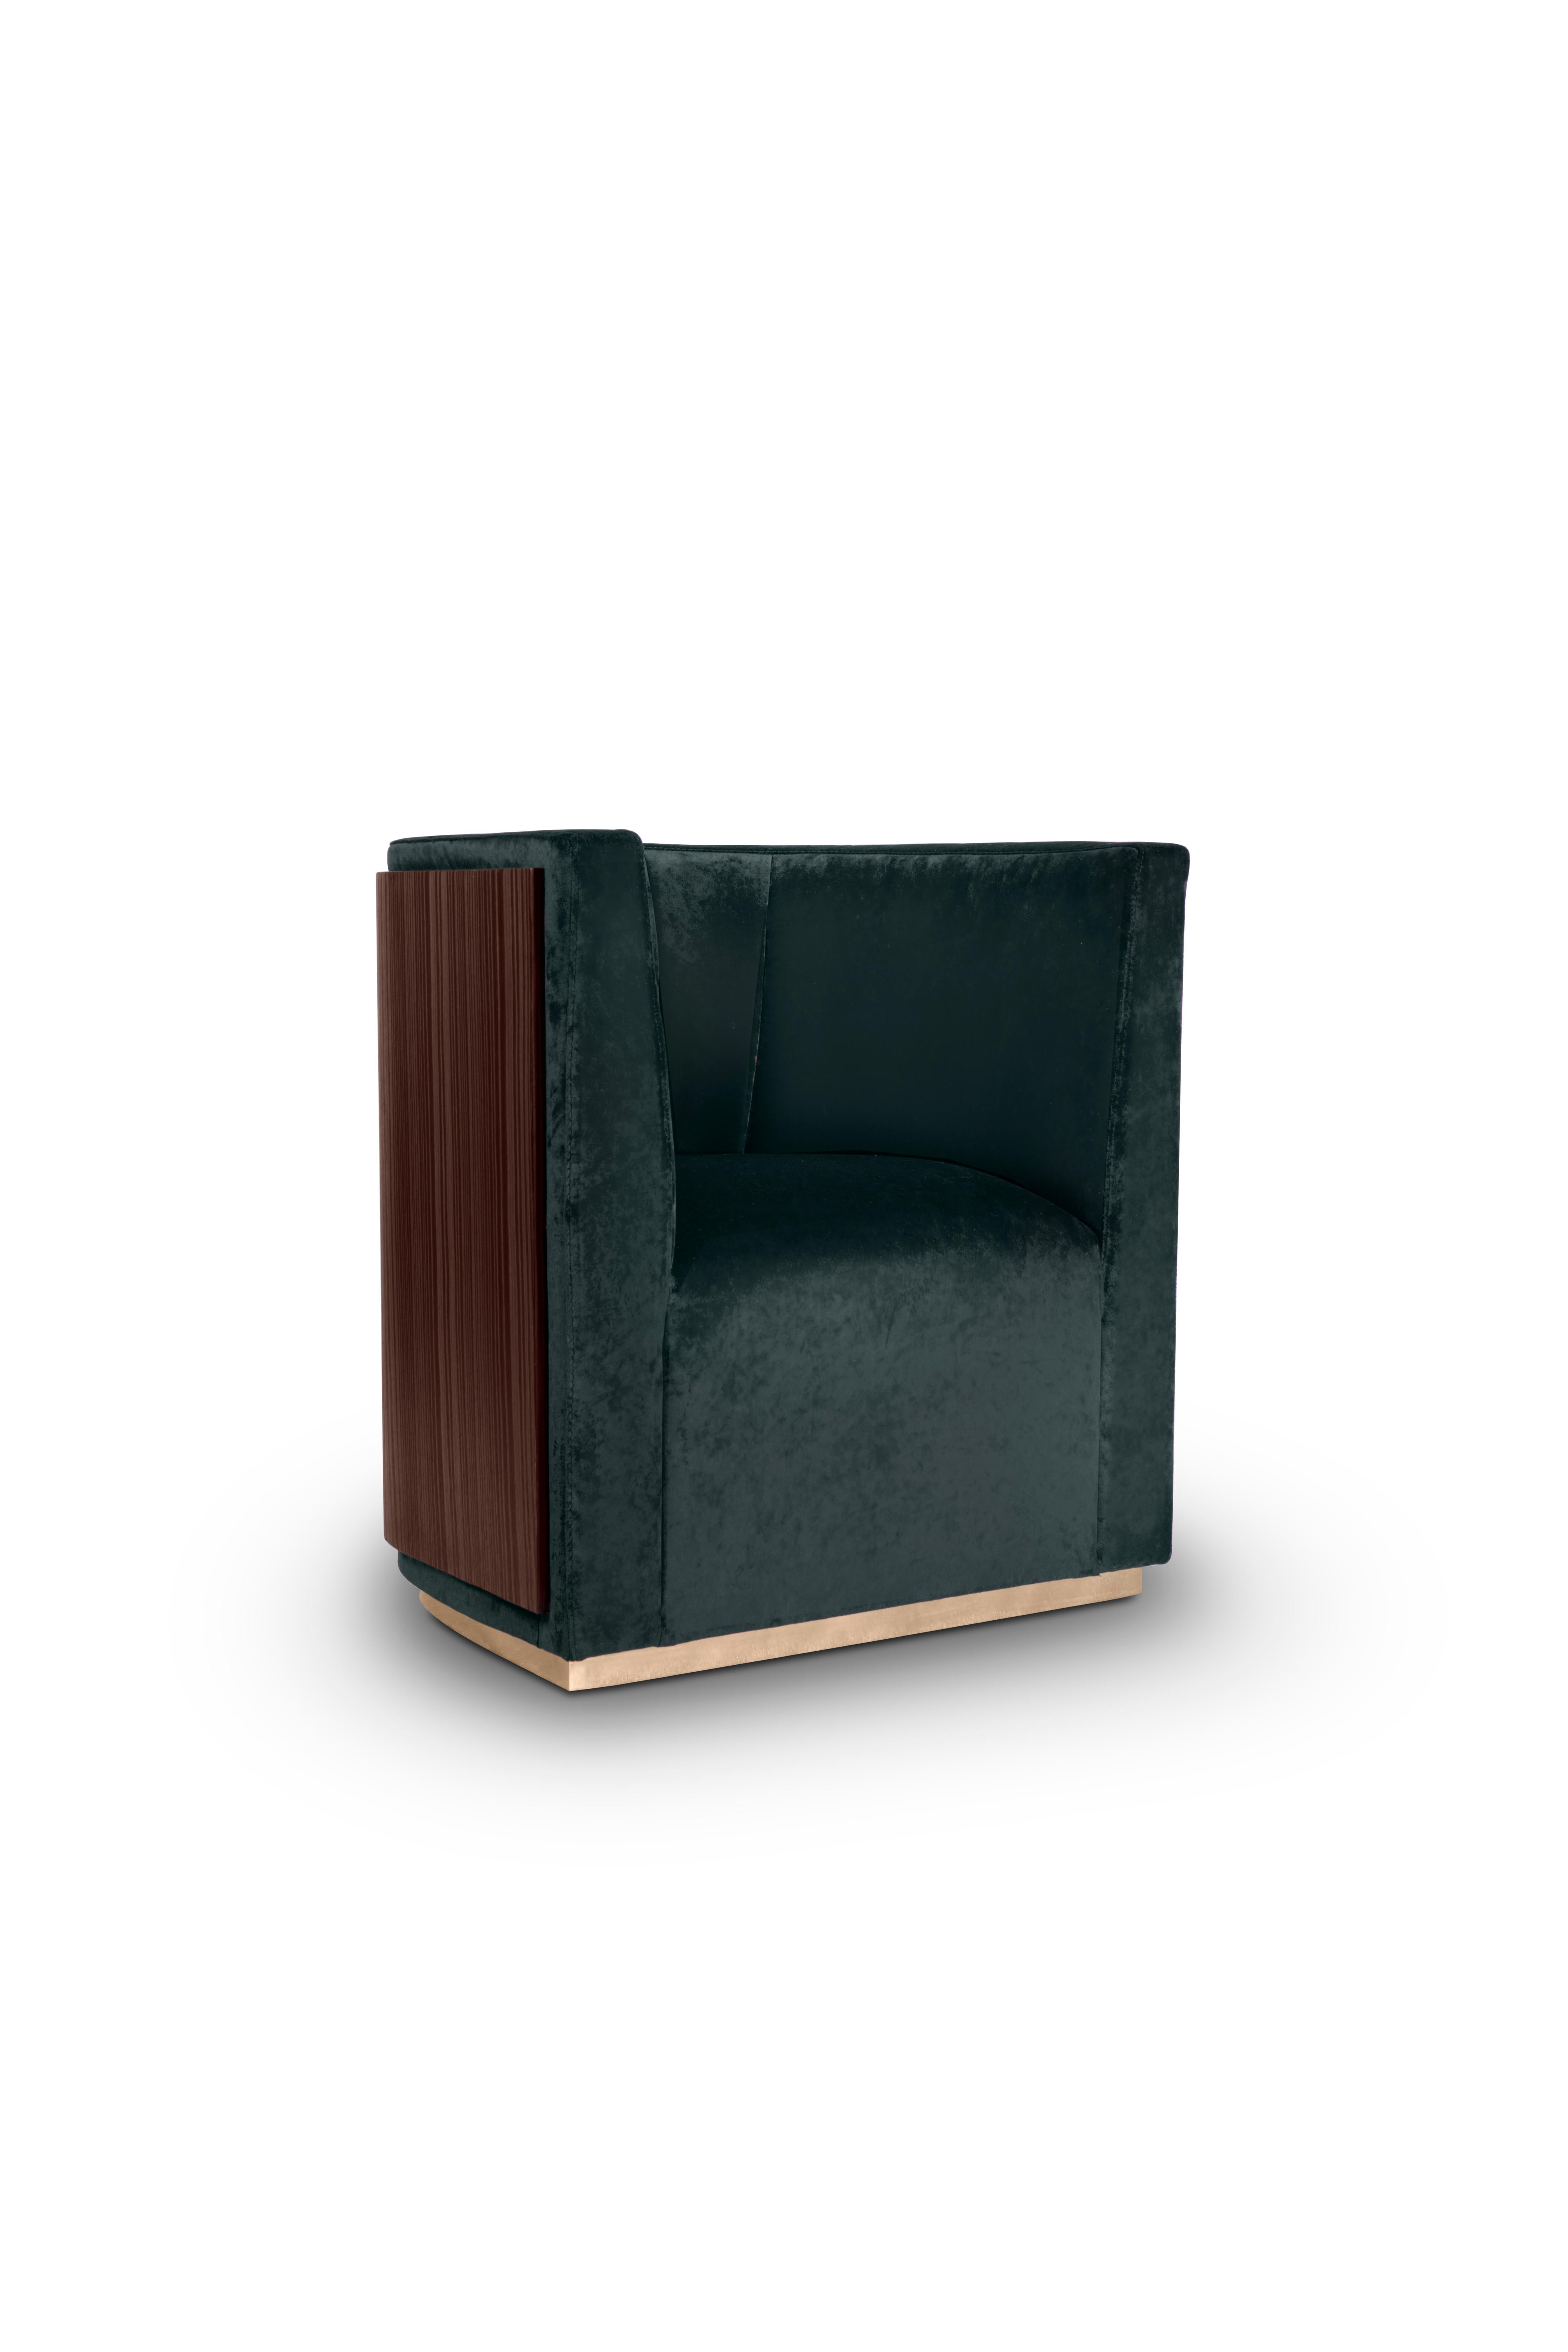 Using a rich velvet upholstery, Grace Armchair has a layered composition, combining a polished brass base with a solid back made of ebony wood, that gives it, somehow, a contrived patina. It is an outstanding piece with a moody and delicate